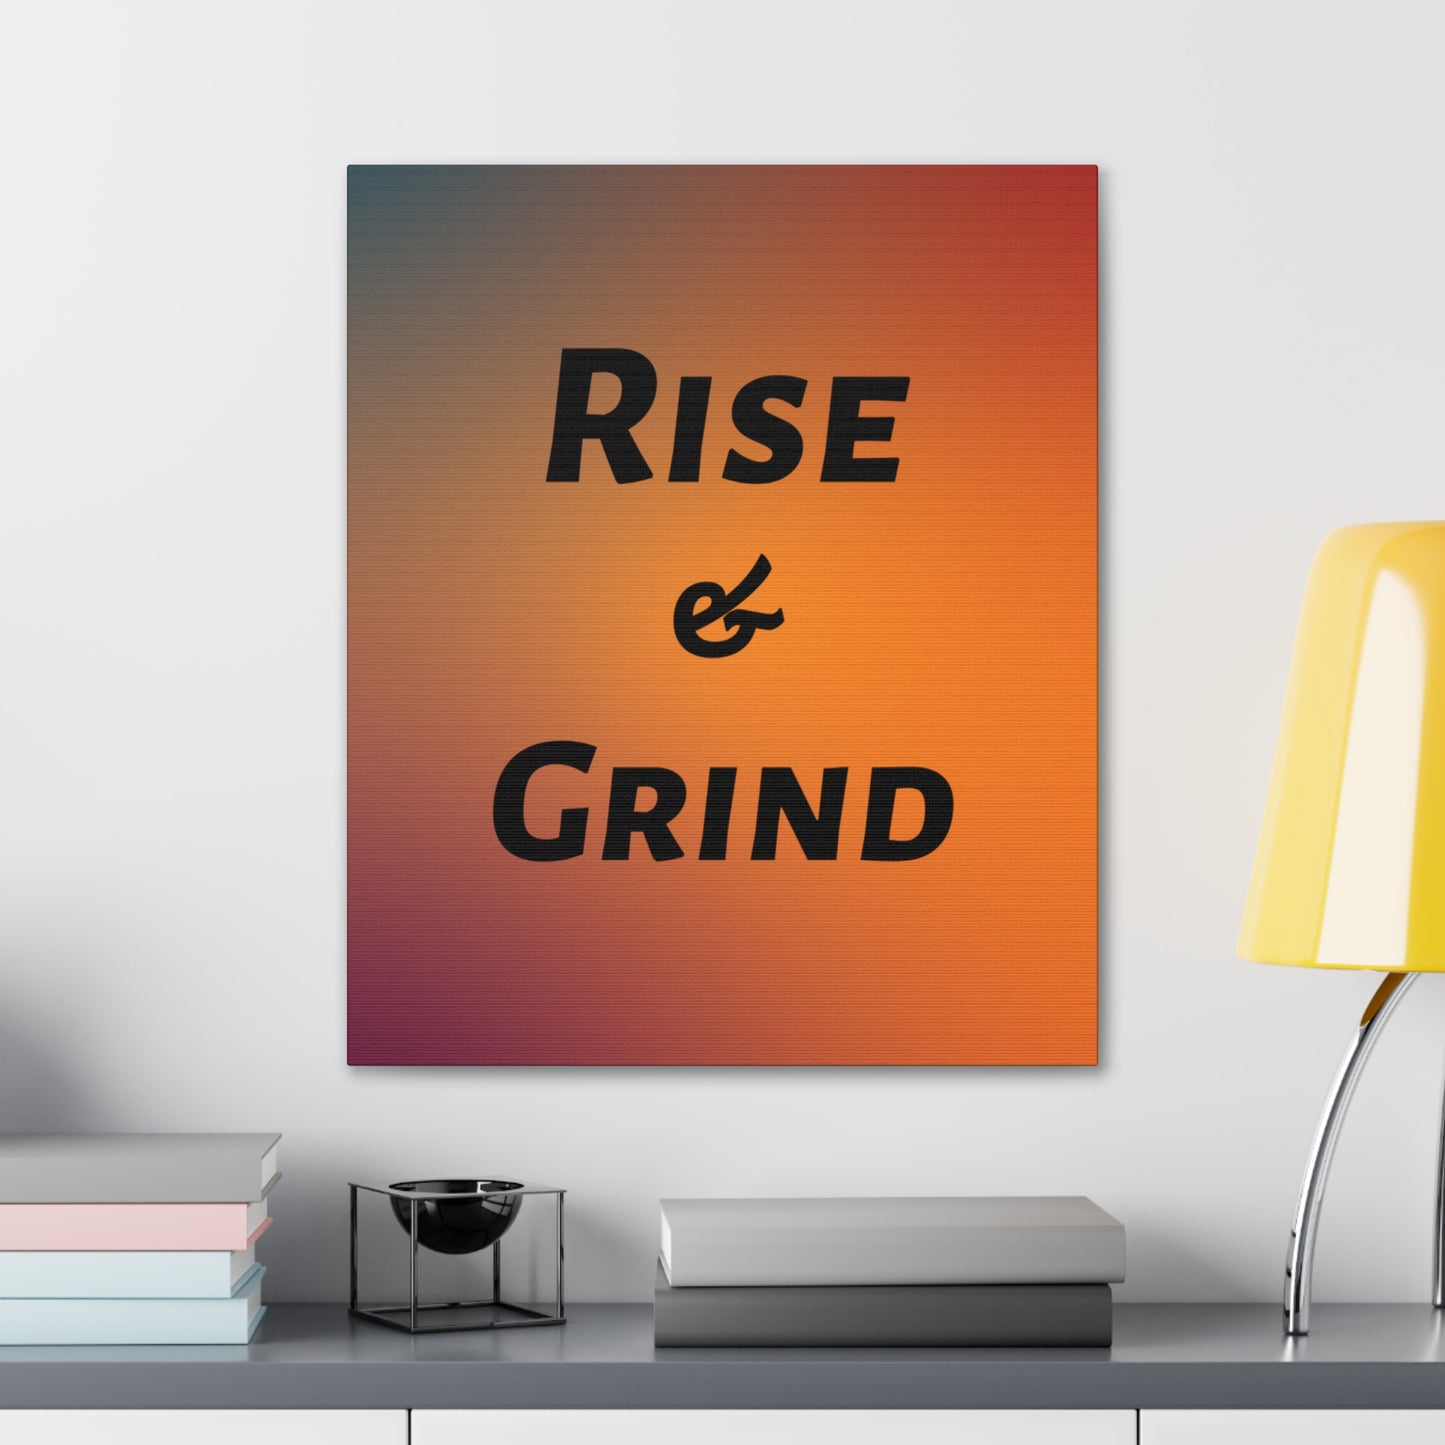 Rise and grind motivational quote on canvas for daily inspiration